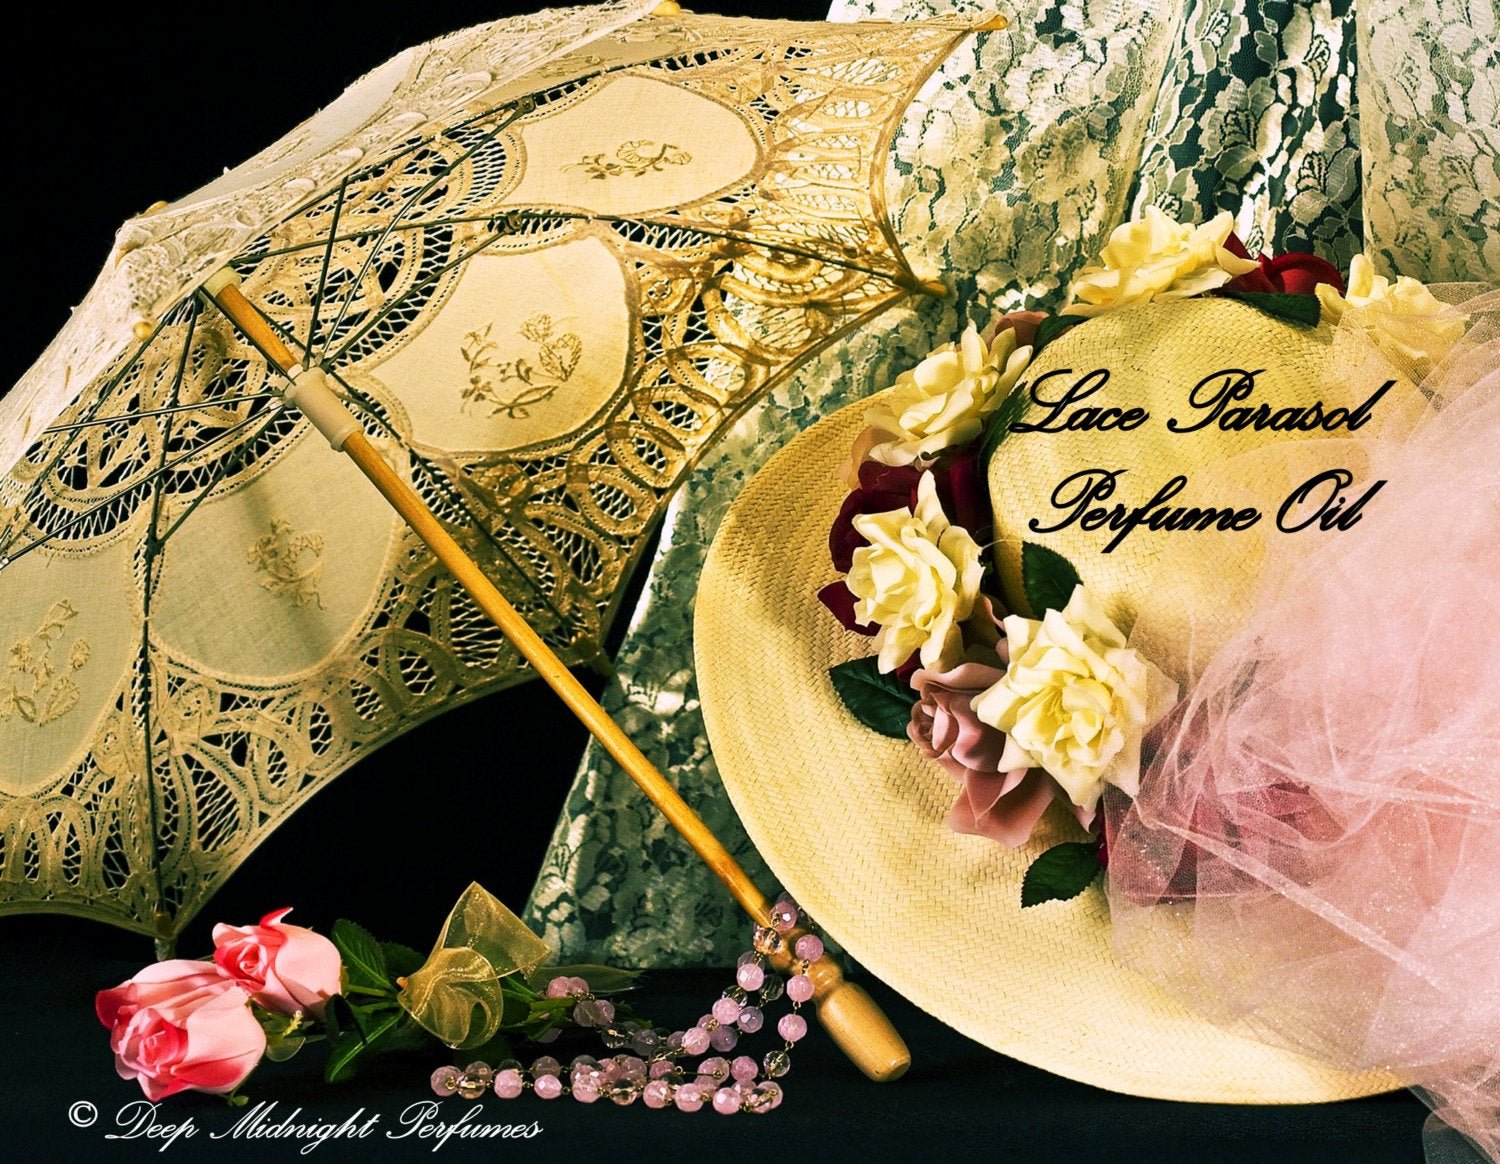 LACE PARASOL™ Perfume Oil - Champagne and Flowers Fragrance - Victorian Perfume